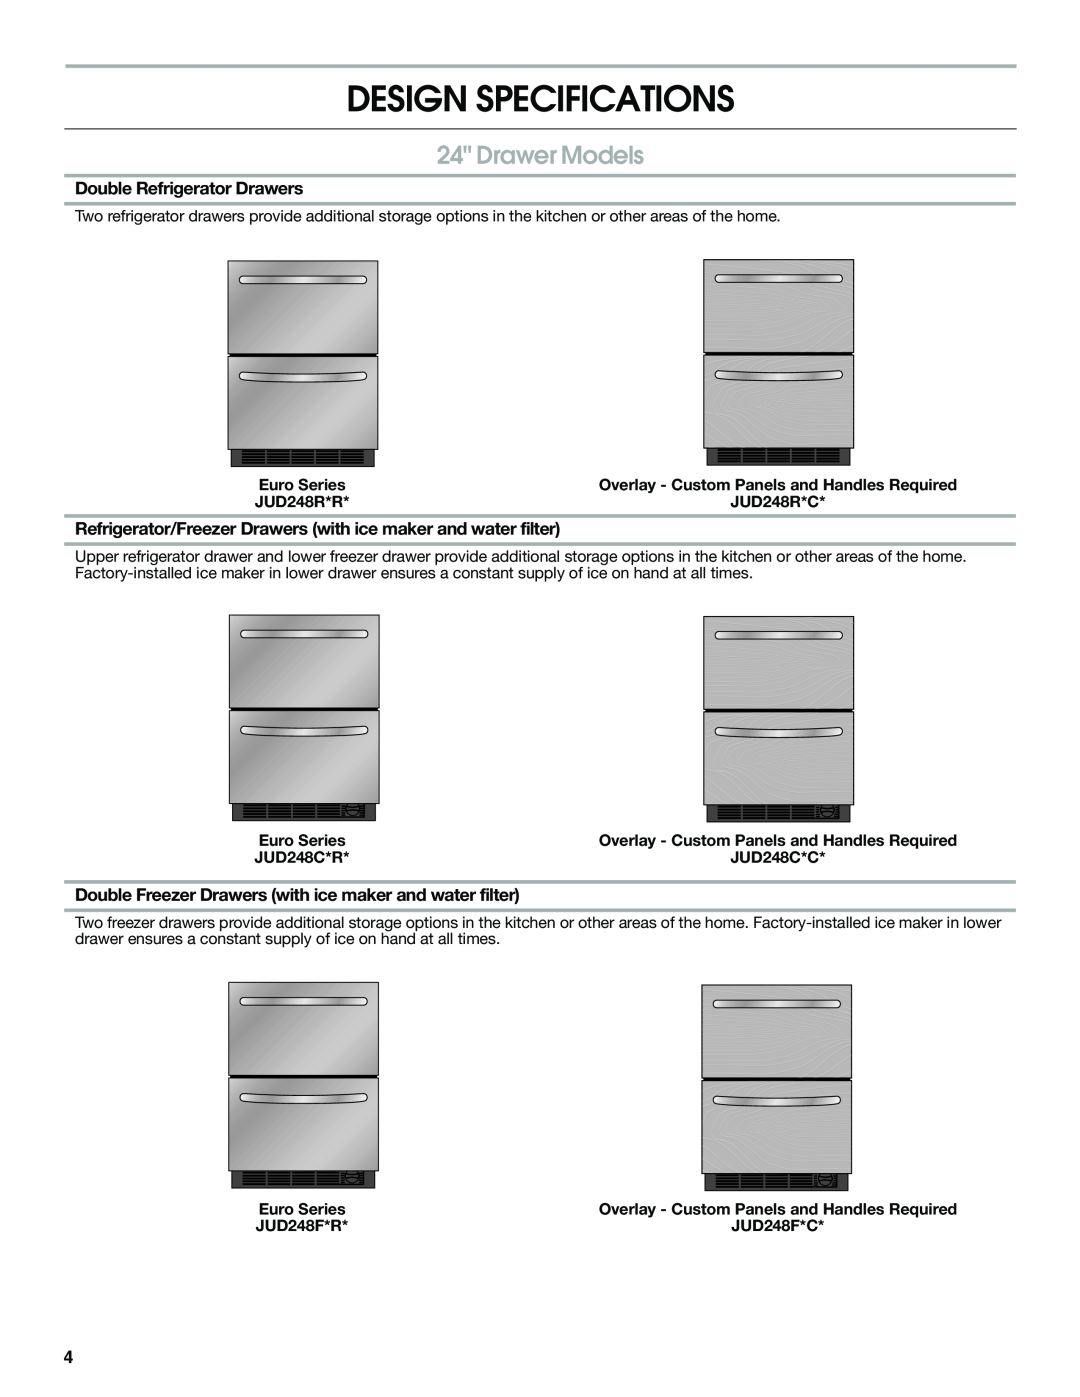 Jenn-Air W10310149A manual Design Specifications, Drawer Models, Double Refrigerator Drawers 